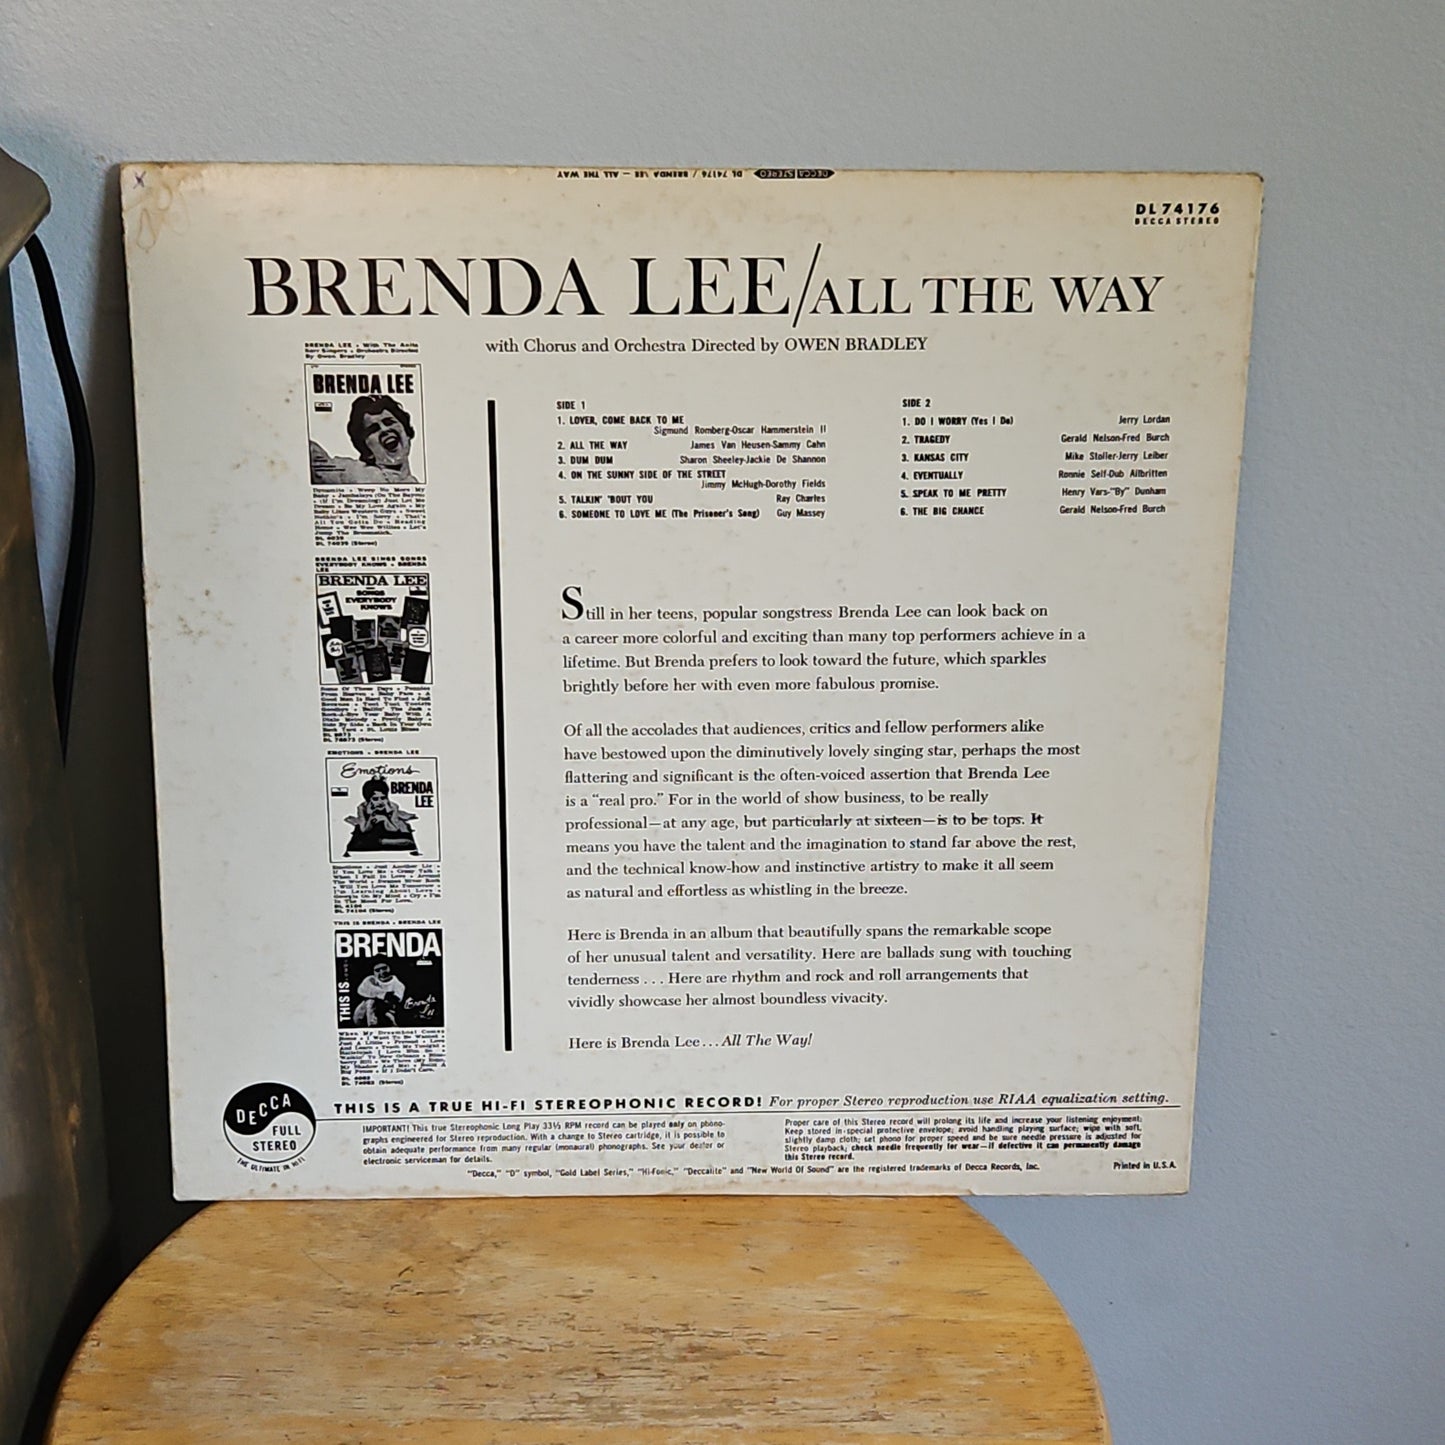 Brenda Lee All The Way With Orchestra and Chorus Conducted By Owen Bradley By Decca Records